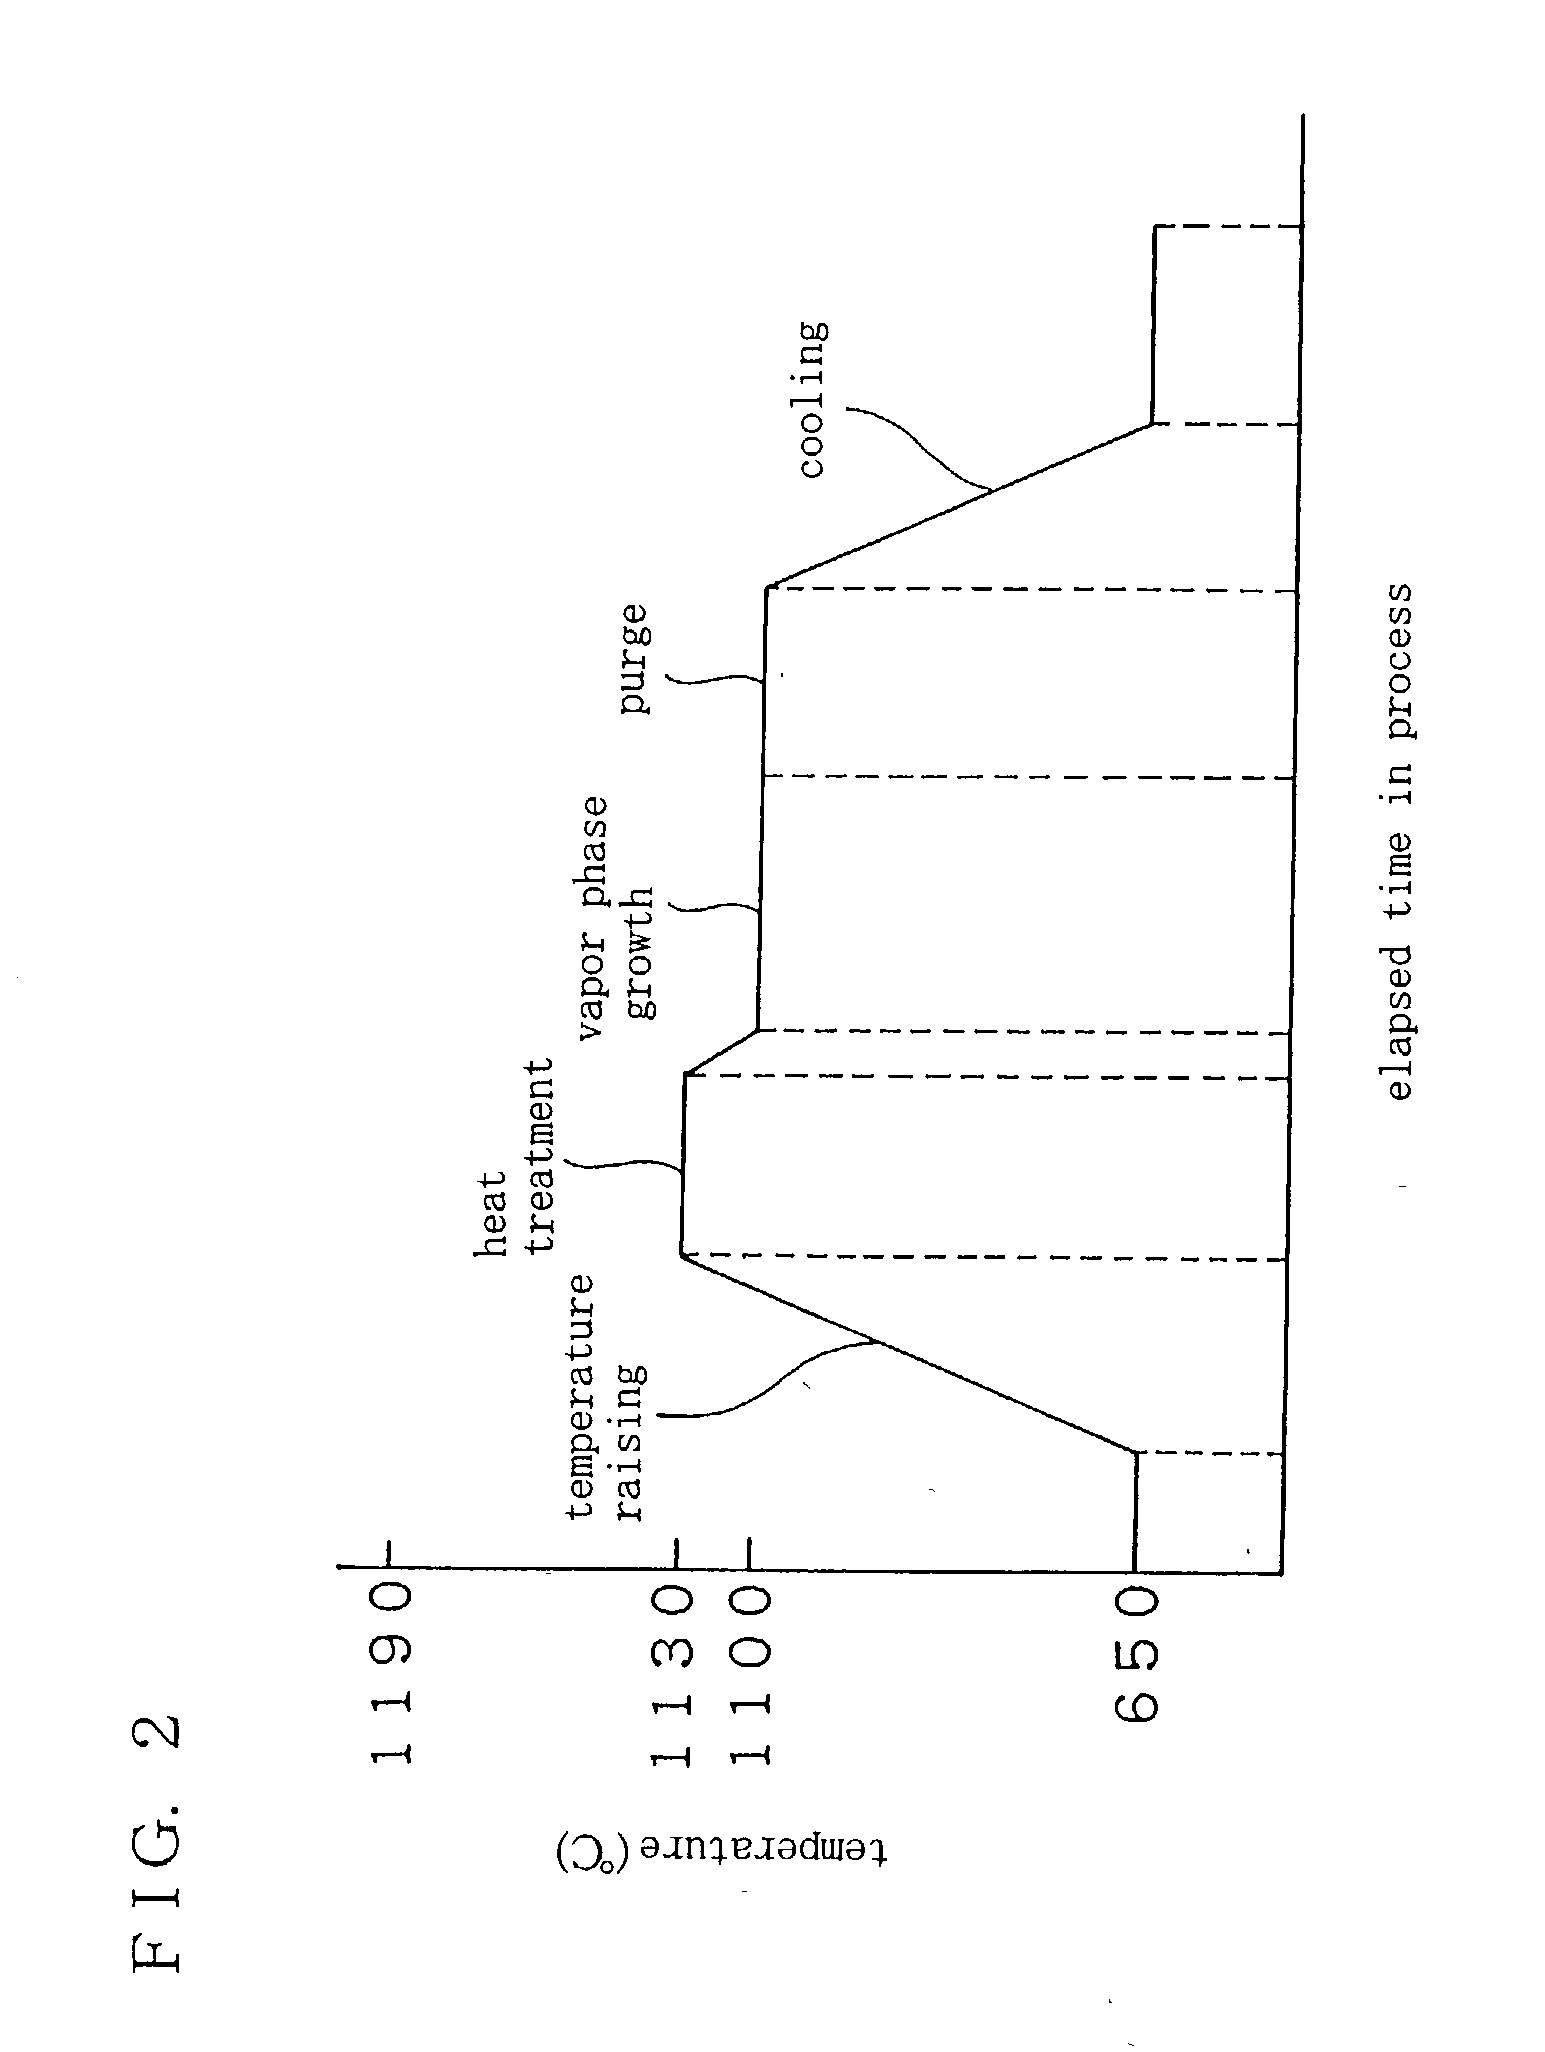 Semiconductor wafer and vapor phase growth apparatus